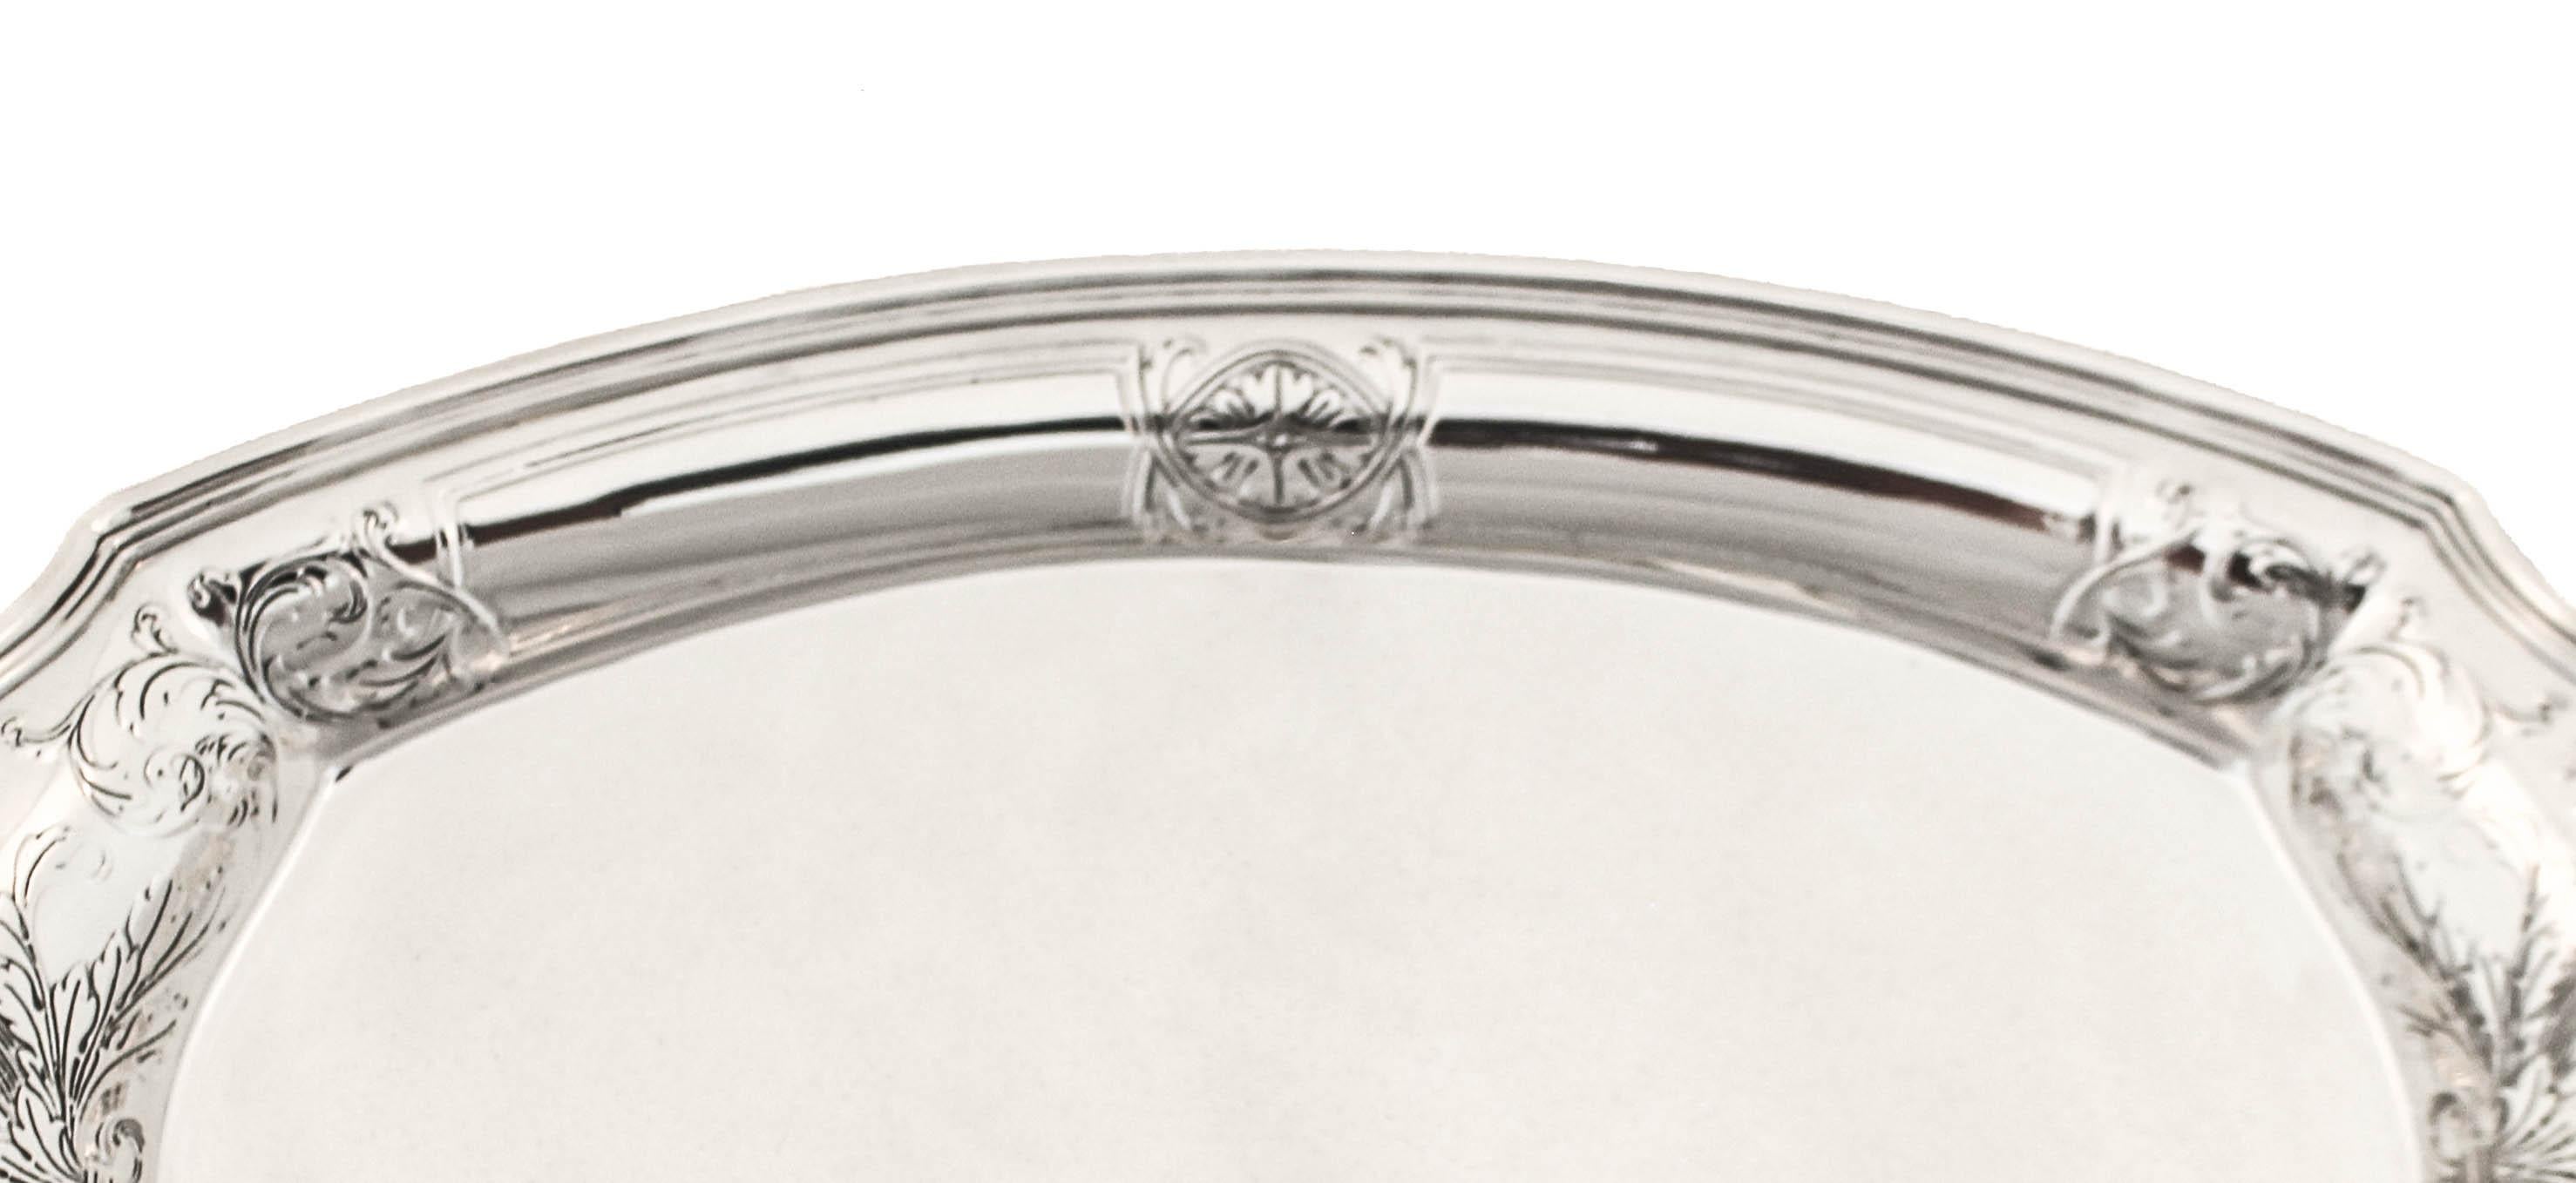 We are thrilled to offer you this sterling silver dish by the world renowned Tiffany & Company. A beautiful example of the artistry of the last century, this oval dish can be used for a multitude of things. From serving hors d’oeuvres and pastries,